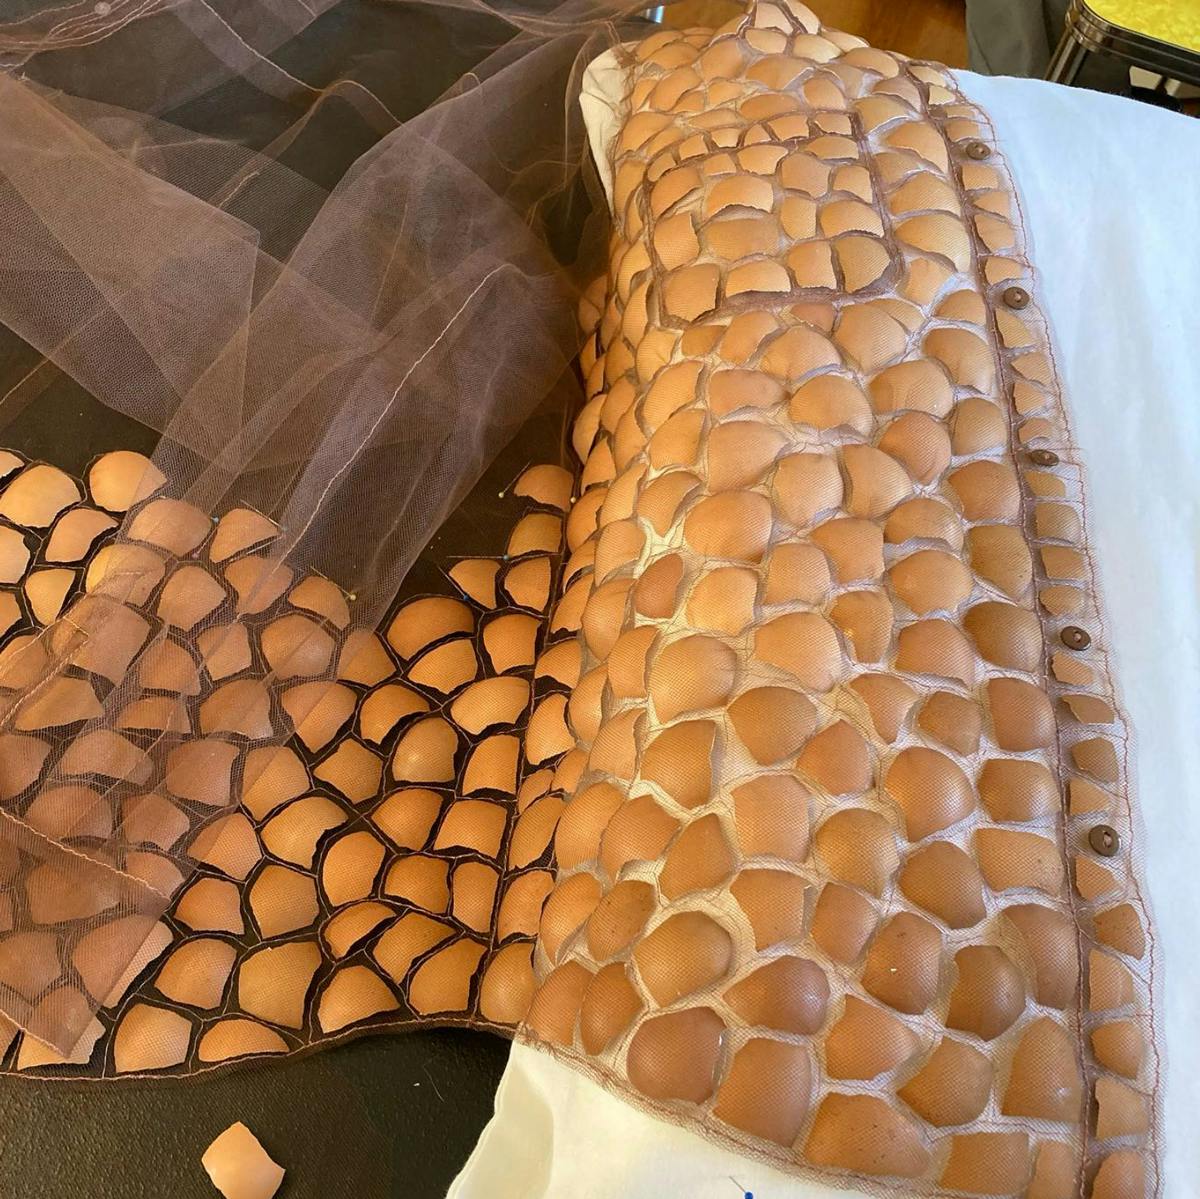 instagram screenshot of a garment being made from broken eggshells being sewn together between layers of tulle